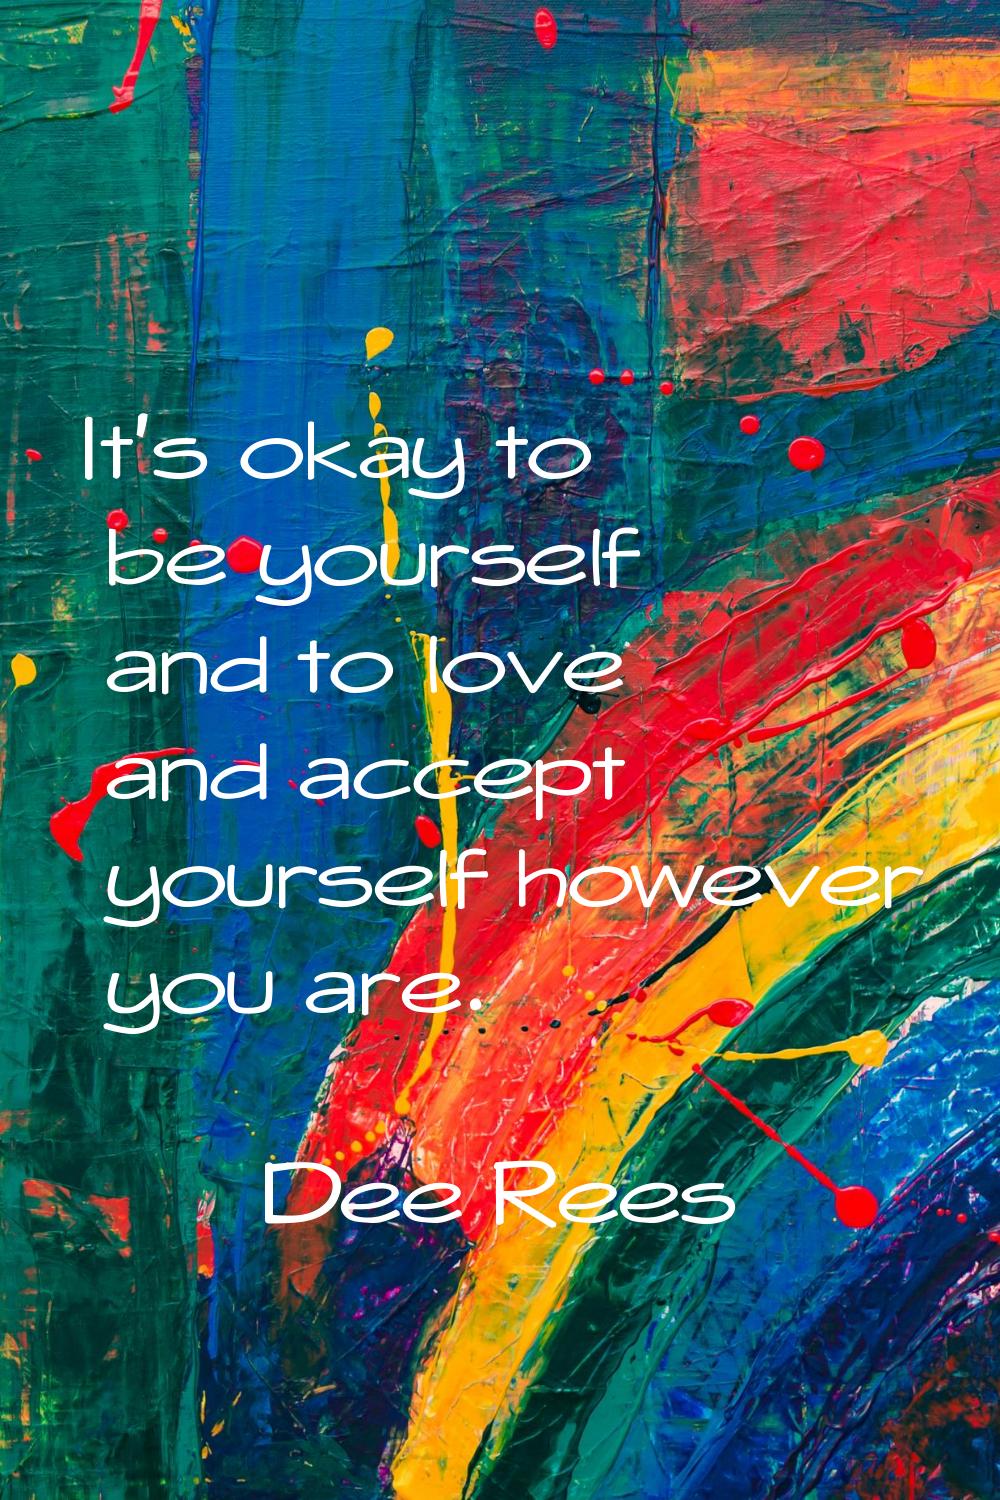 It's okay to be yourself and to love and accept yourself however you are.